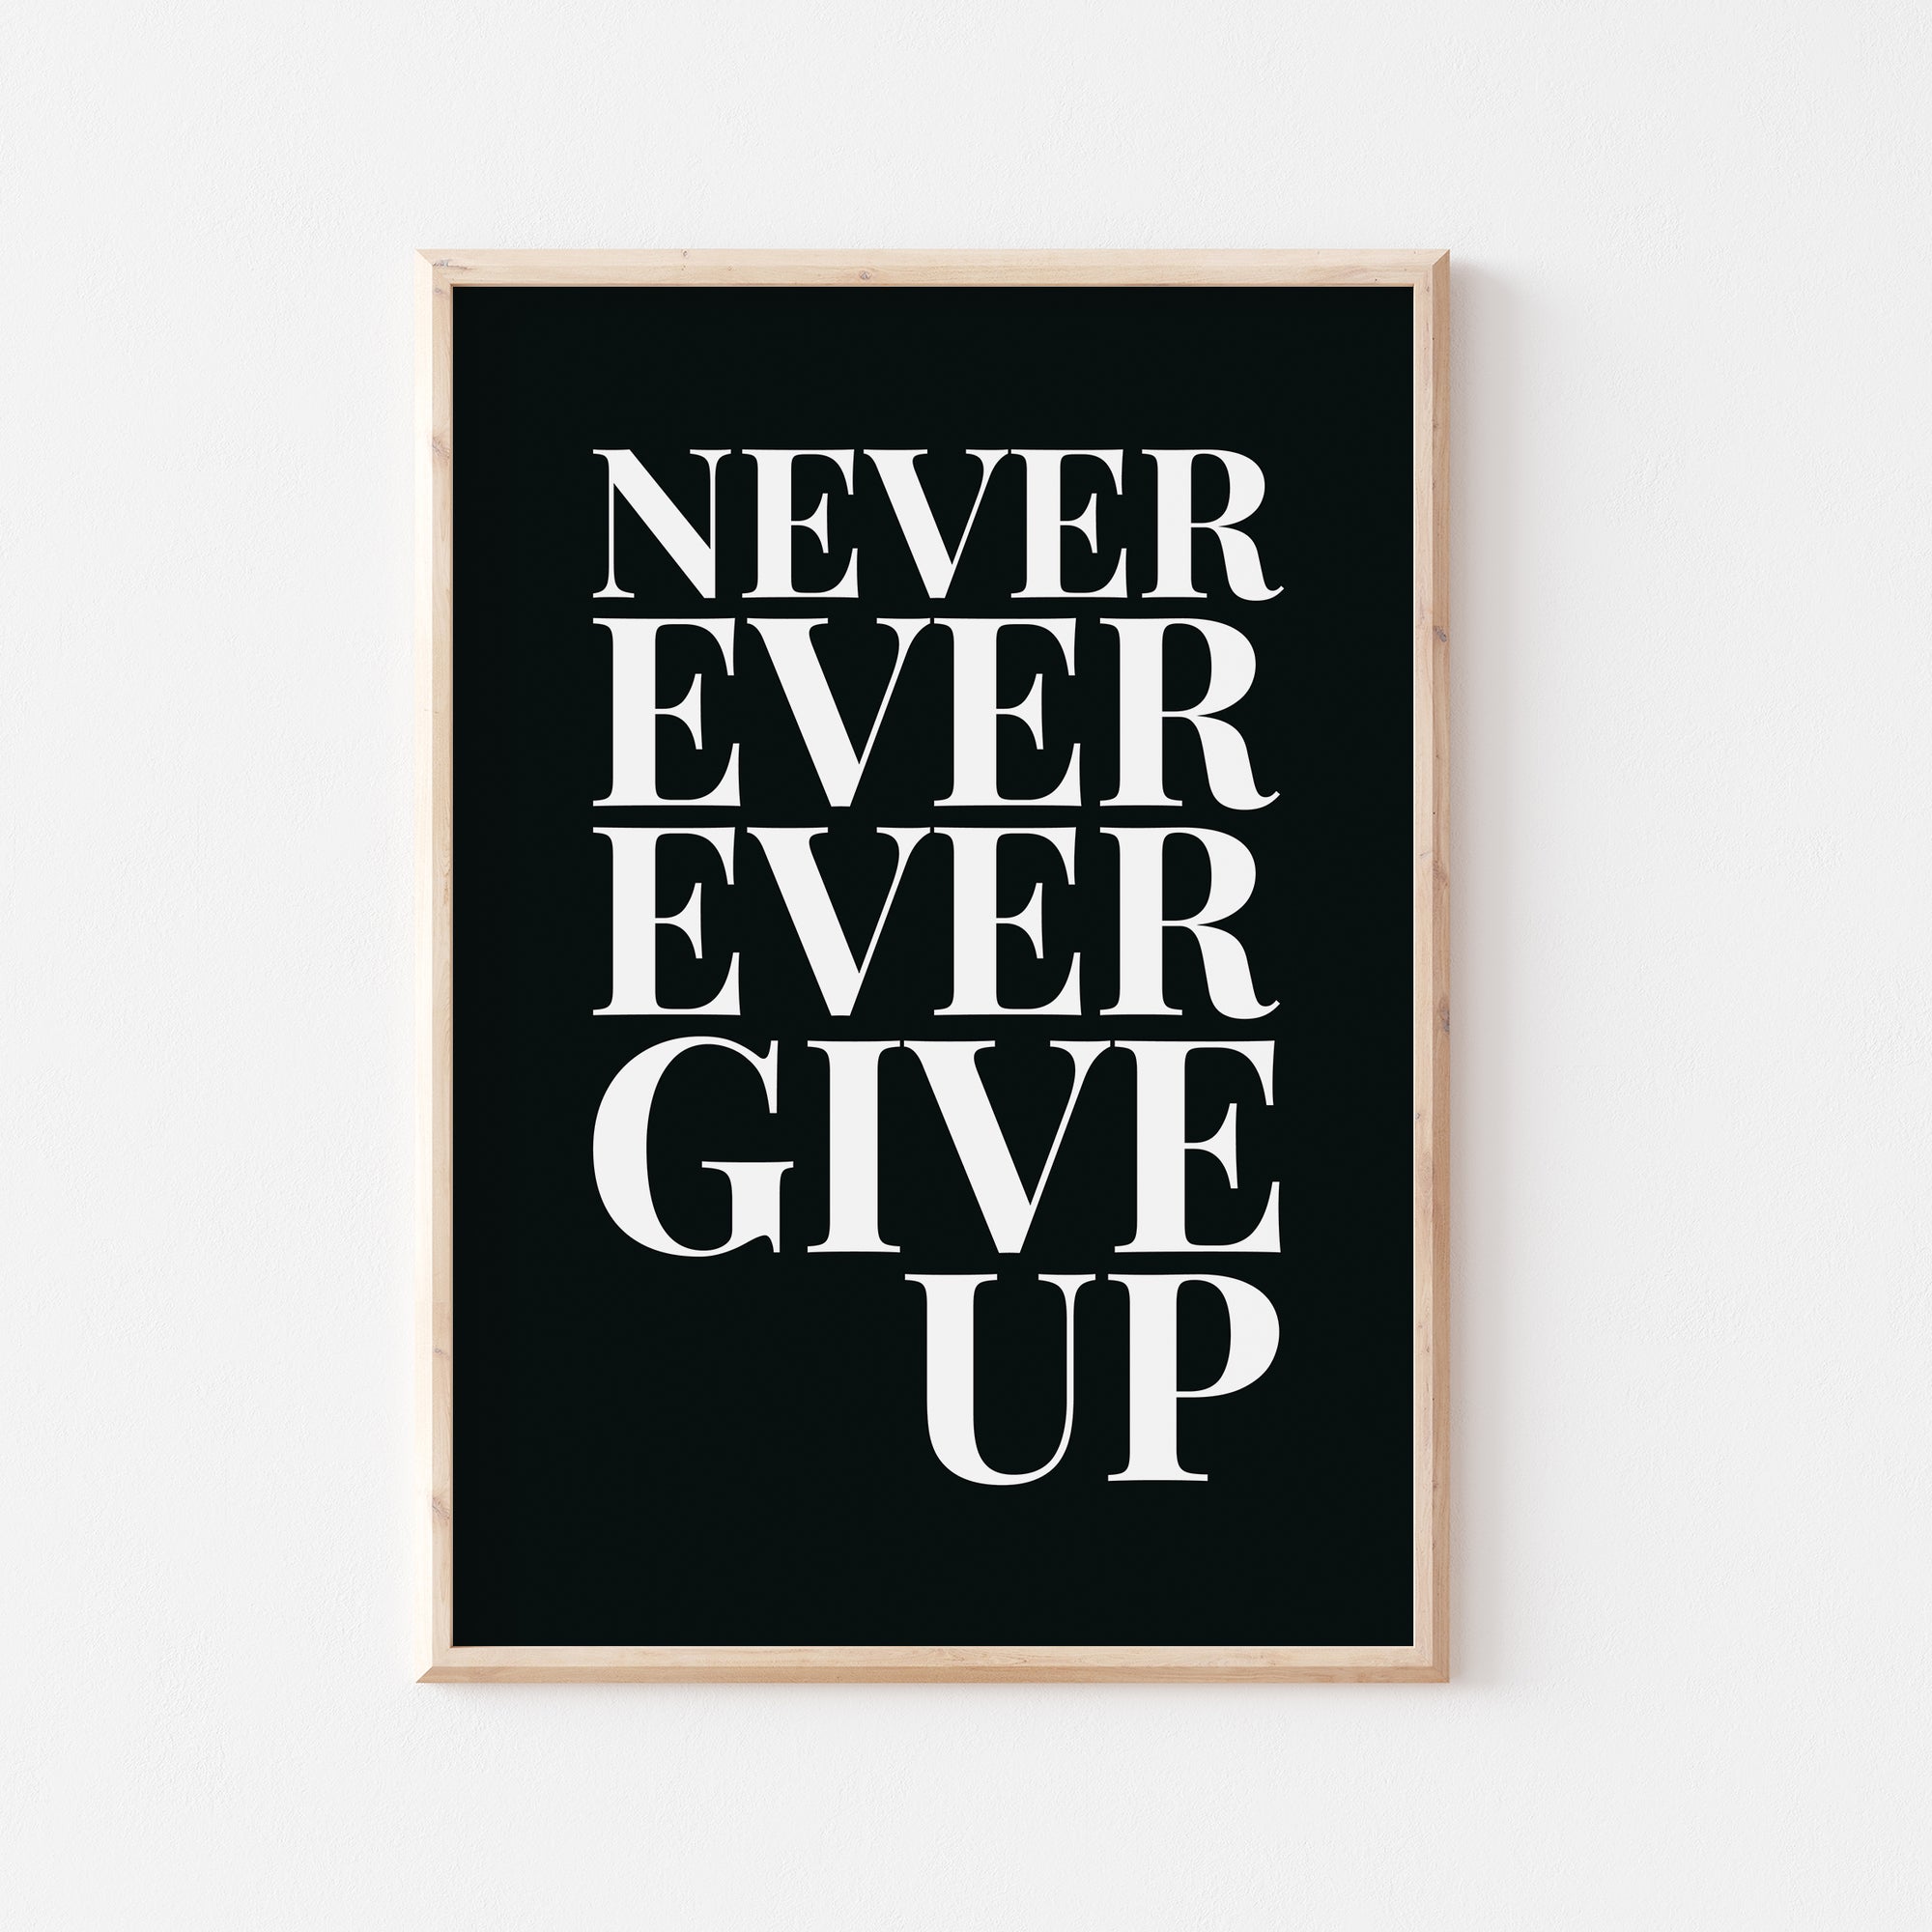 Never Ever Ever Give Up Print